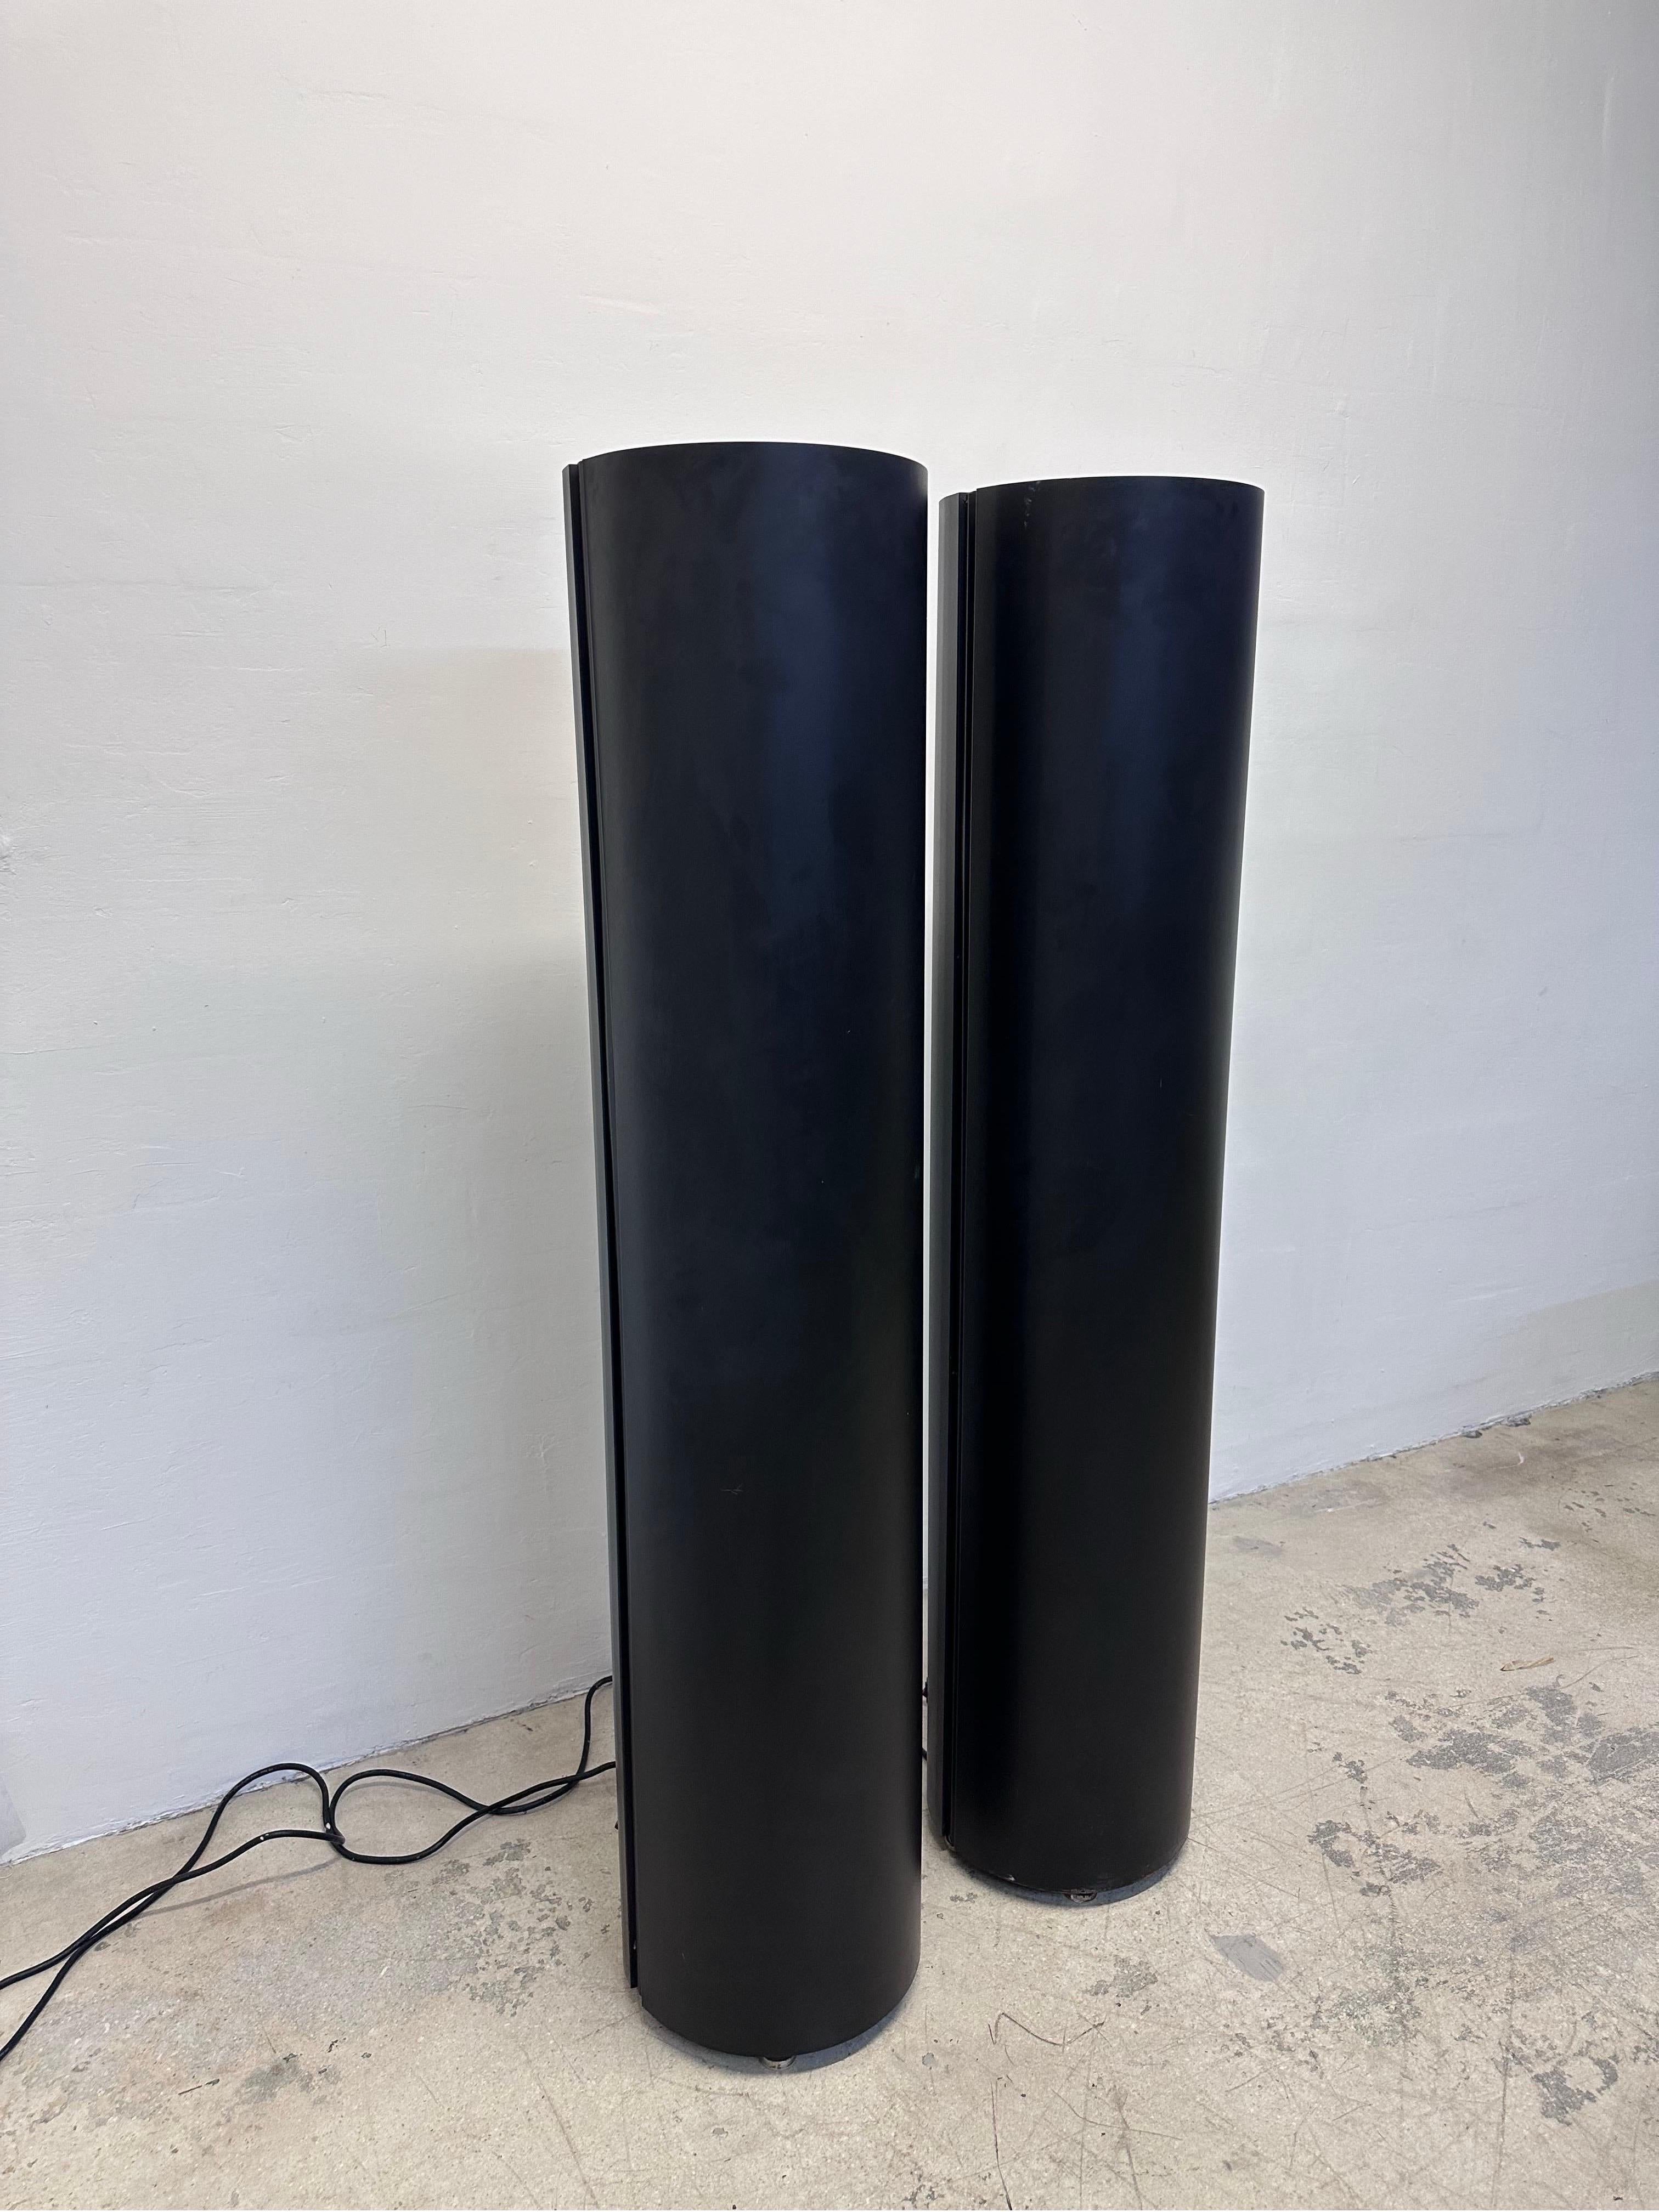 Pair of postmodern industrial black cylindrical torchiere floor lamps, circa 1990s.

Lamps use a specialty 250w metal halide ED28 mercury bulb with E39 base and used specifically for ANSI ballast M58/E.  Bulbs are not included due to risk of